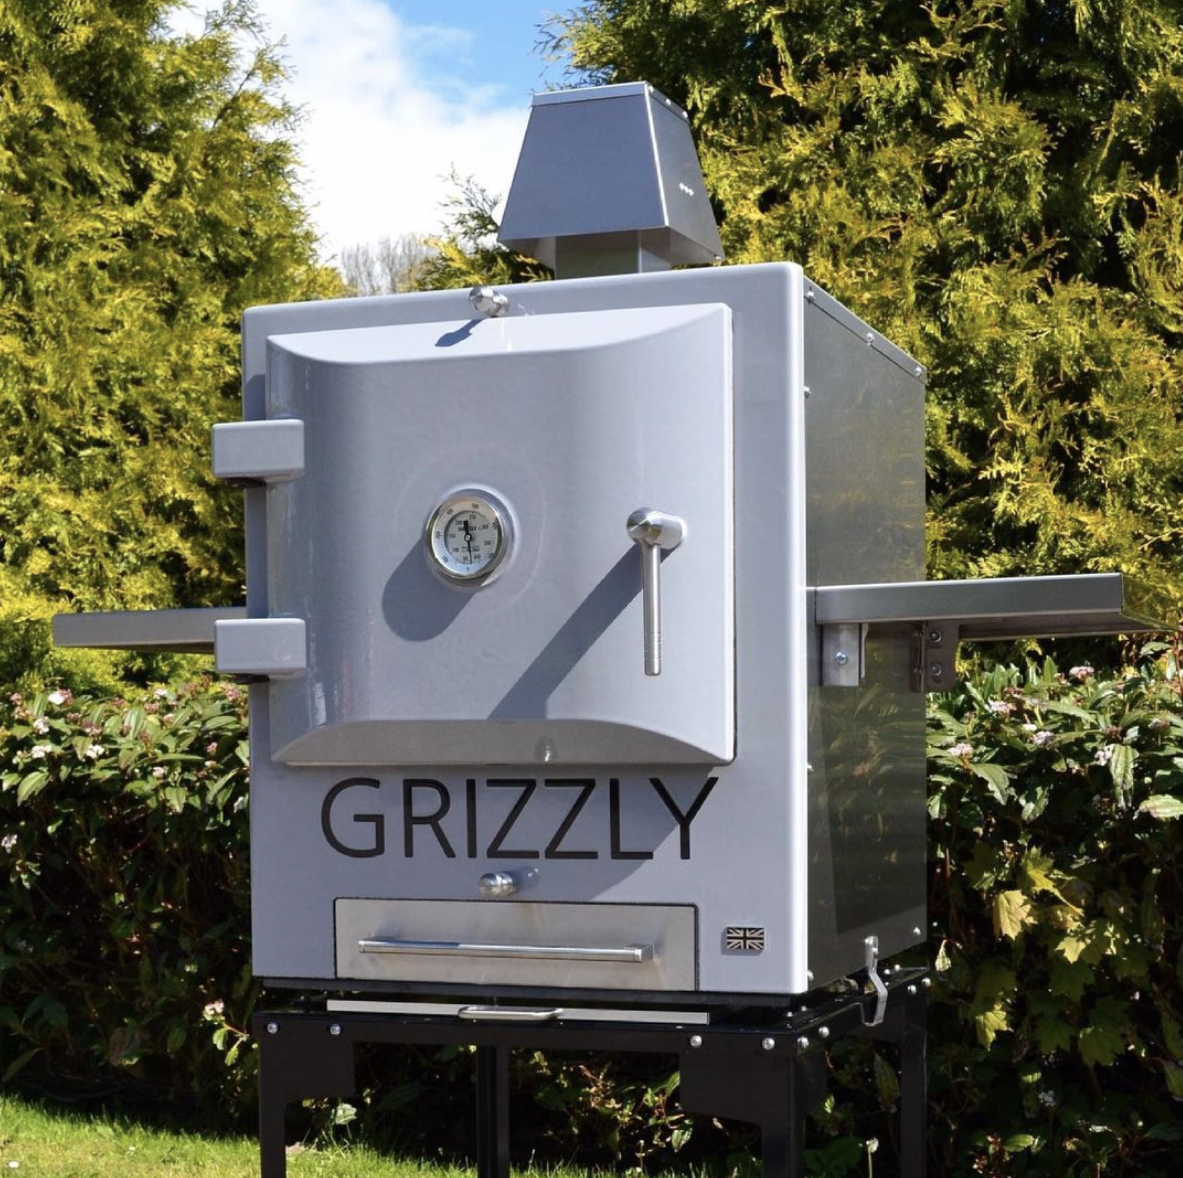 The Grizzle Outdoor Oven from Lazy Susan